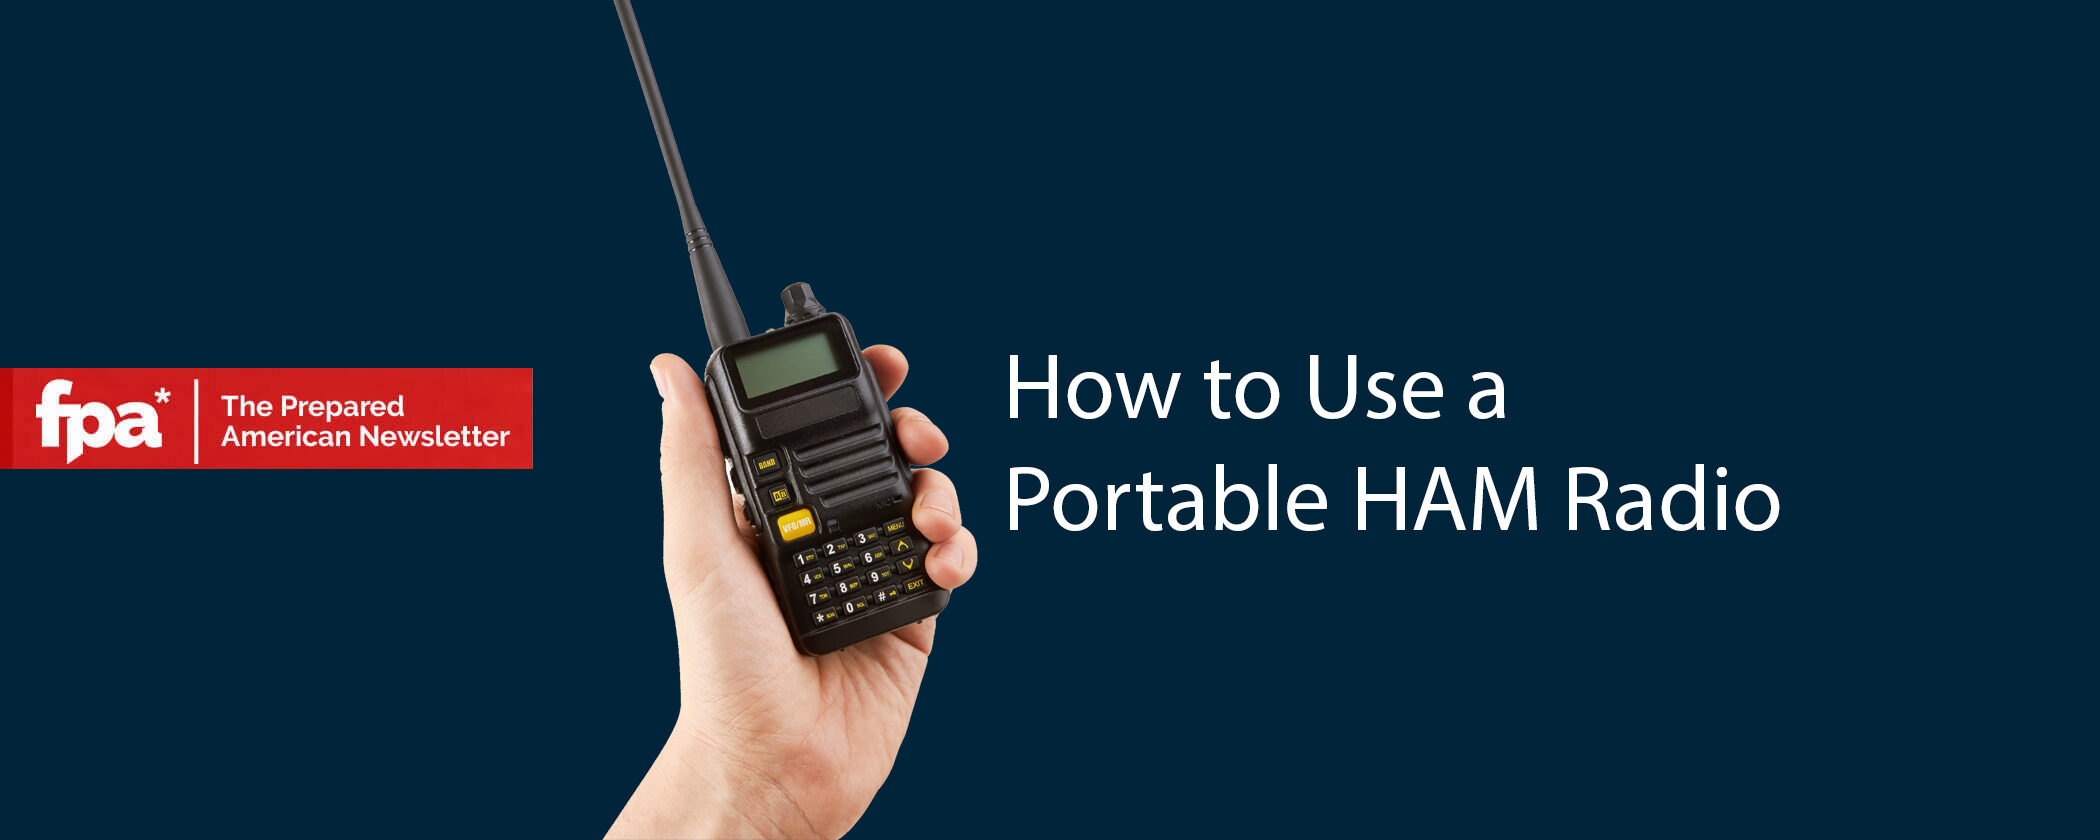 How to Use a Portable HAM Radio